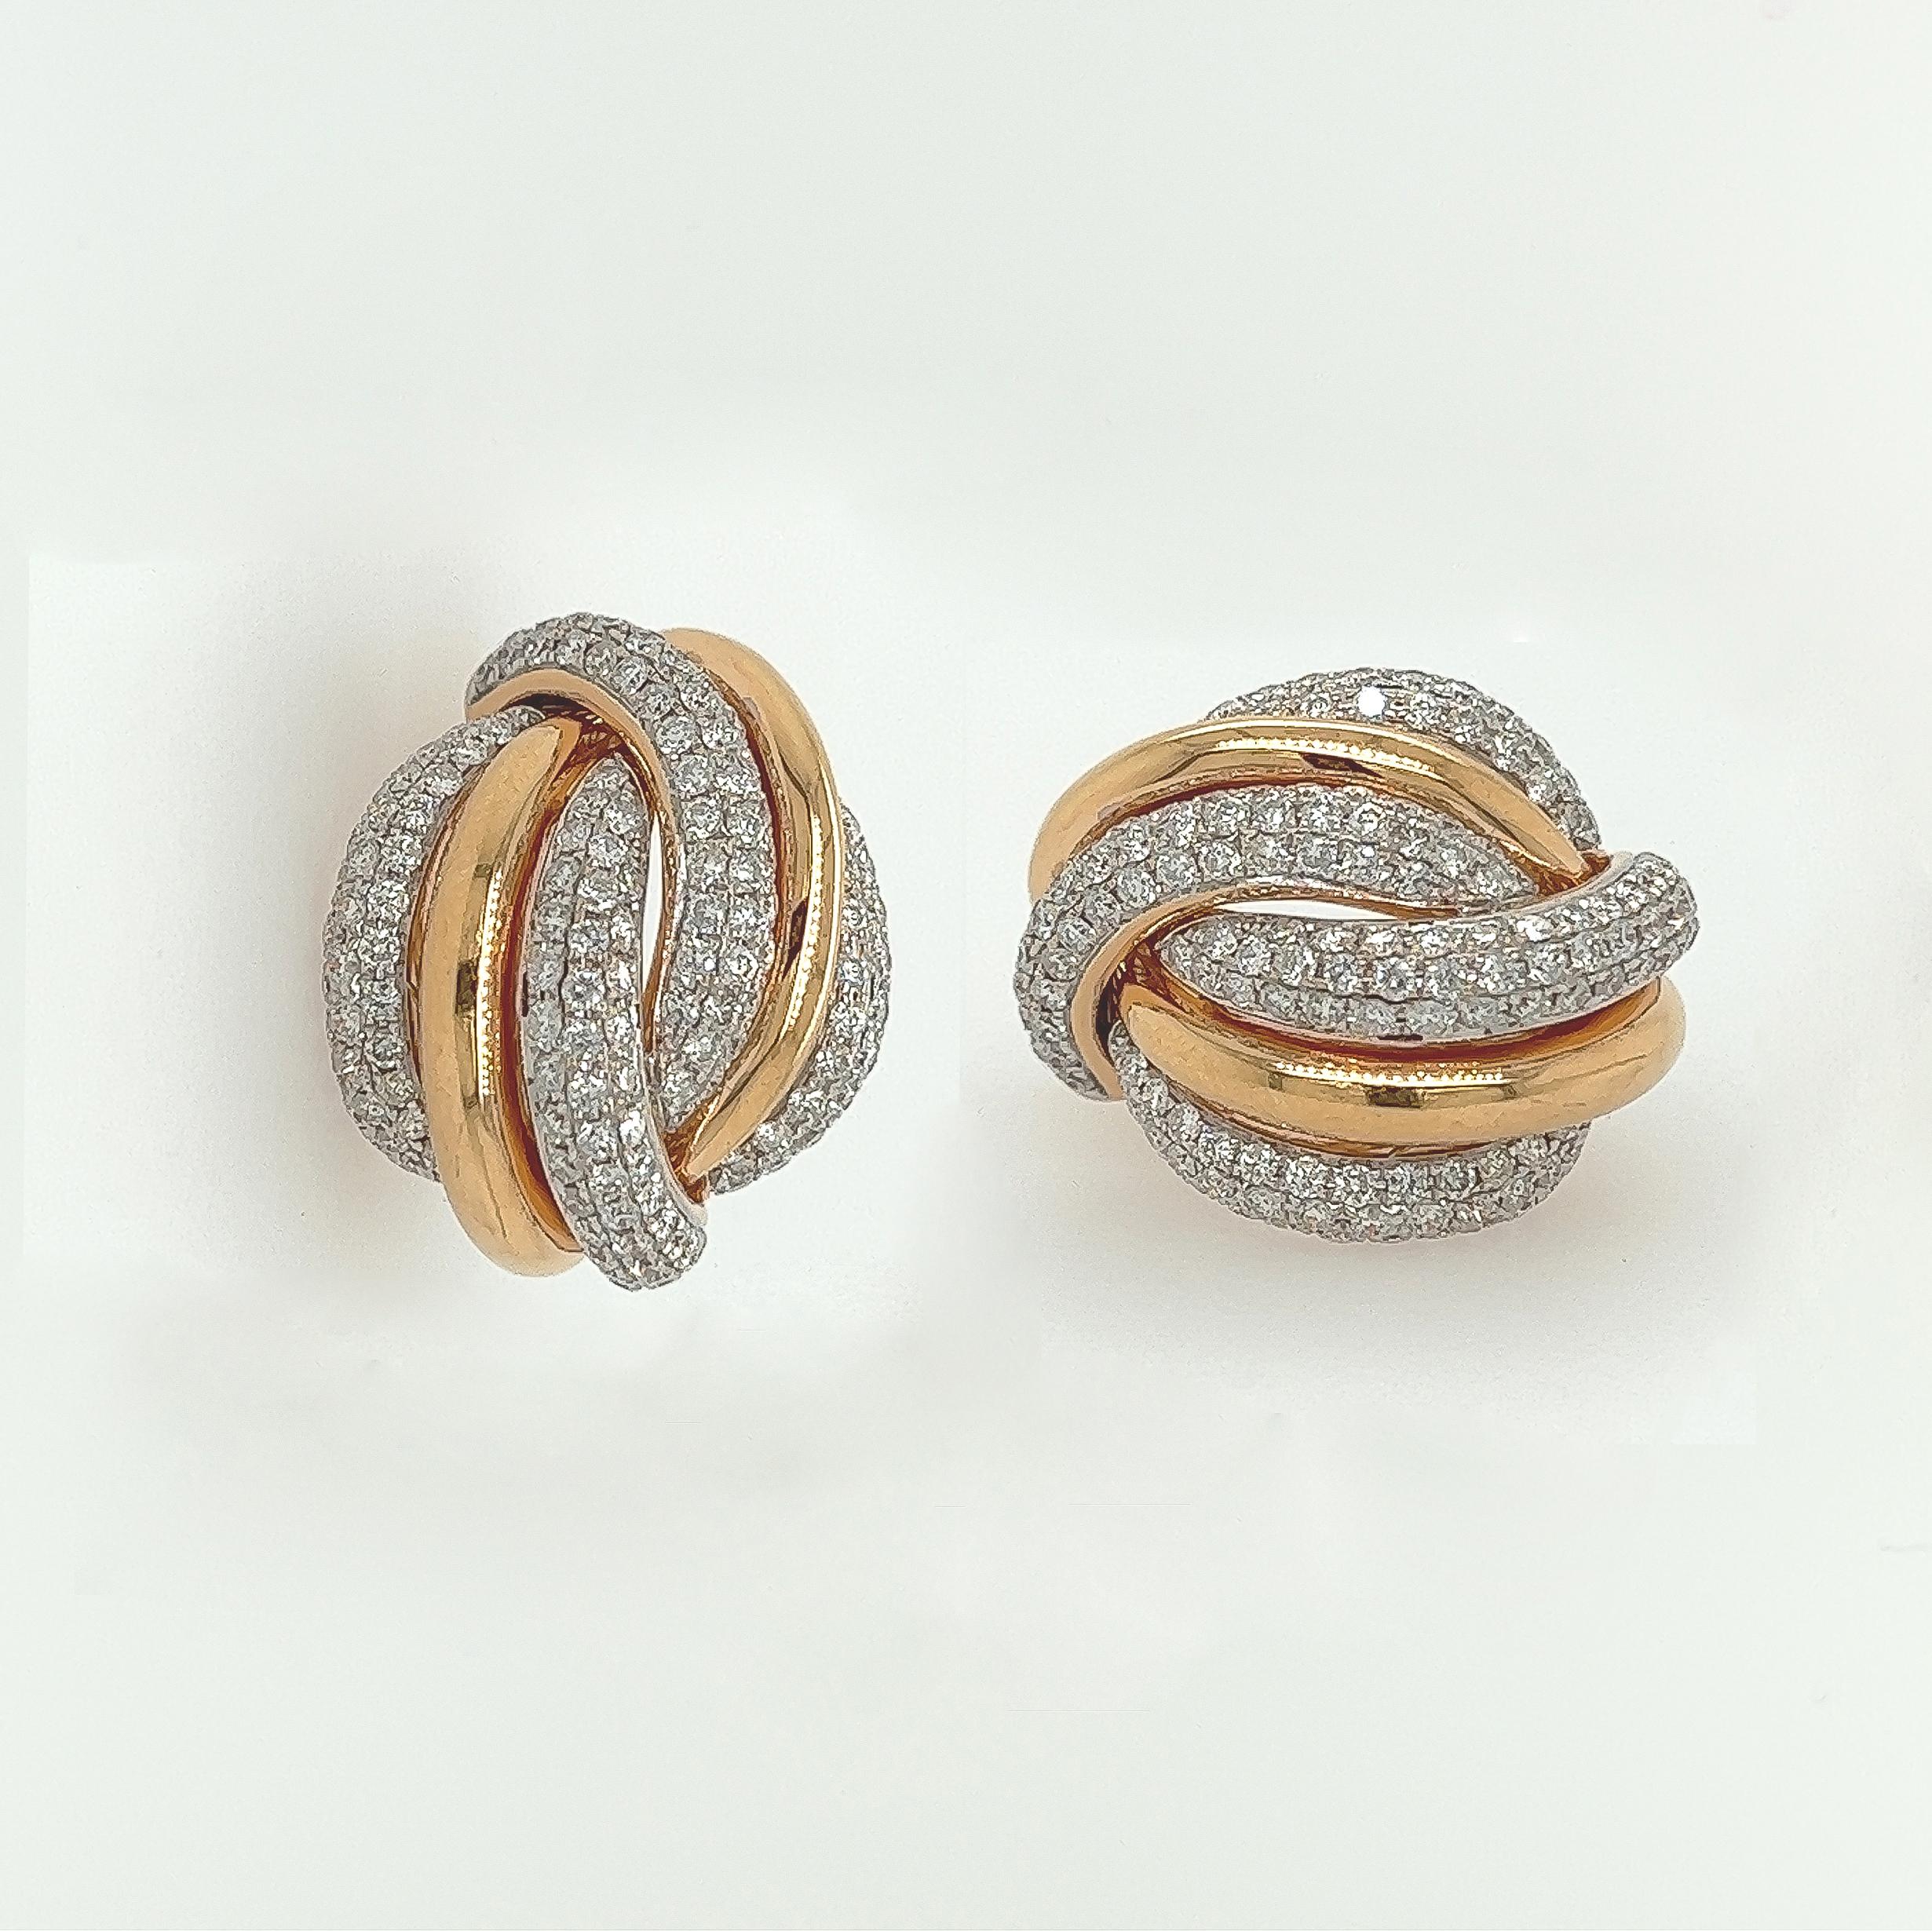 4.25 Carat Diamond and Gold Earrings in 18K Rose Gold

Classy gold hoop earrings exquisitely designed and built. The twist of diamond and rose gold makes the earrings stand out. A great versatile addition to your wardrobe that goes with many things.